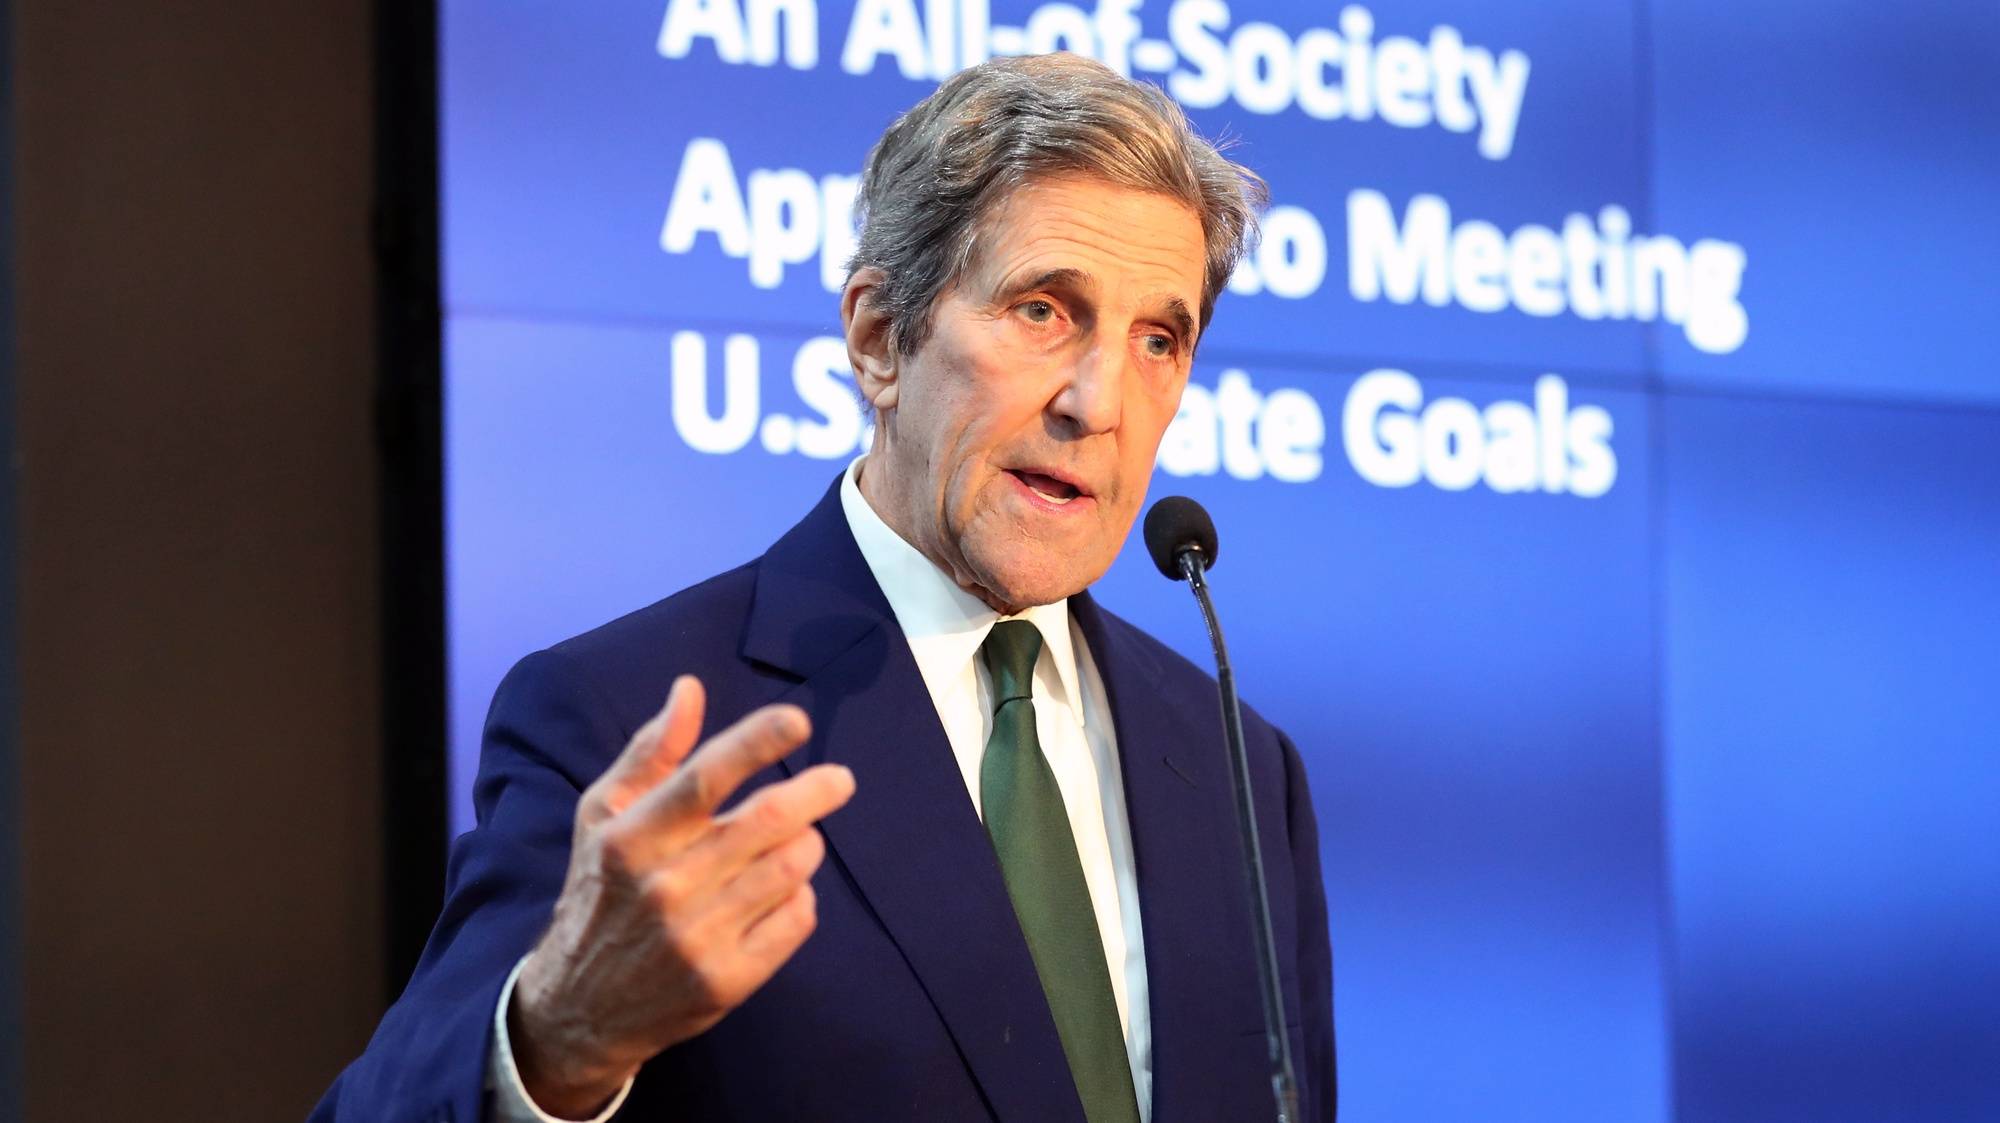 epa10293389 U.S. Special Presidential Envoy for Climate John Kerry speaks during the 2022 United Nations Climate Change Conference (COP27),  in Sharm El-Sheikh, Egypt, 08 November 2022. The 2022 United Nations Climate Change Conference (COP27), runs from 06-18 November, and is expected to host one of the largest number of participants in the annual global climate conference as over 40,000 estimated attendees, including heads of states and governments, civil society, media and other relevant stakeholders will attend. The events will include a Climate Implementation Summit, thematic days, flagship initiatives, and Green Zone activities engaging with climate and other global challenges.  EPA/KHALED ELFIQI